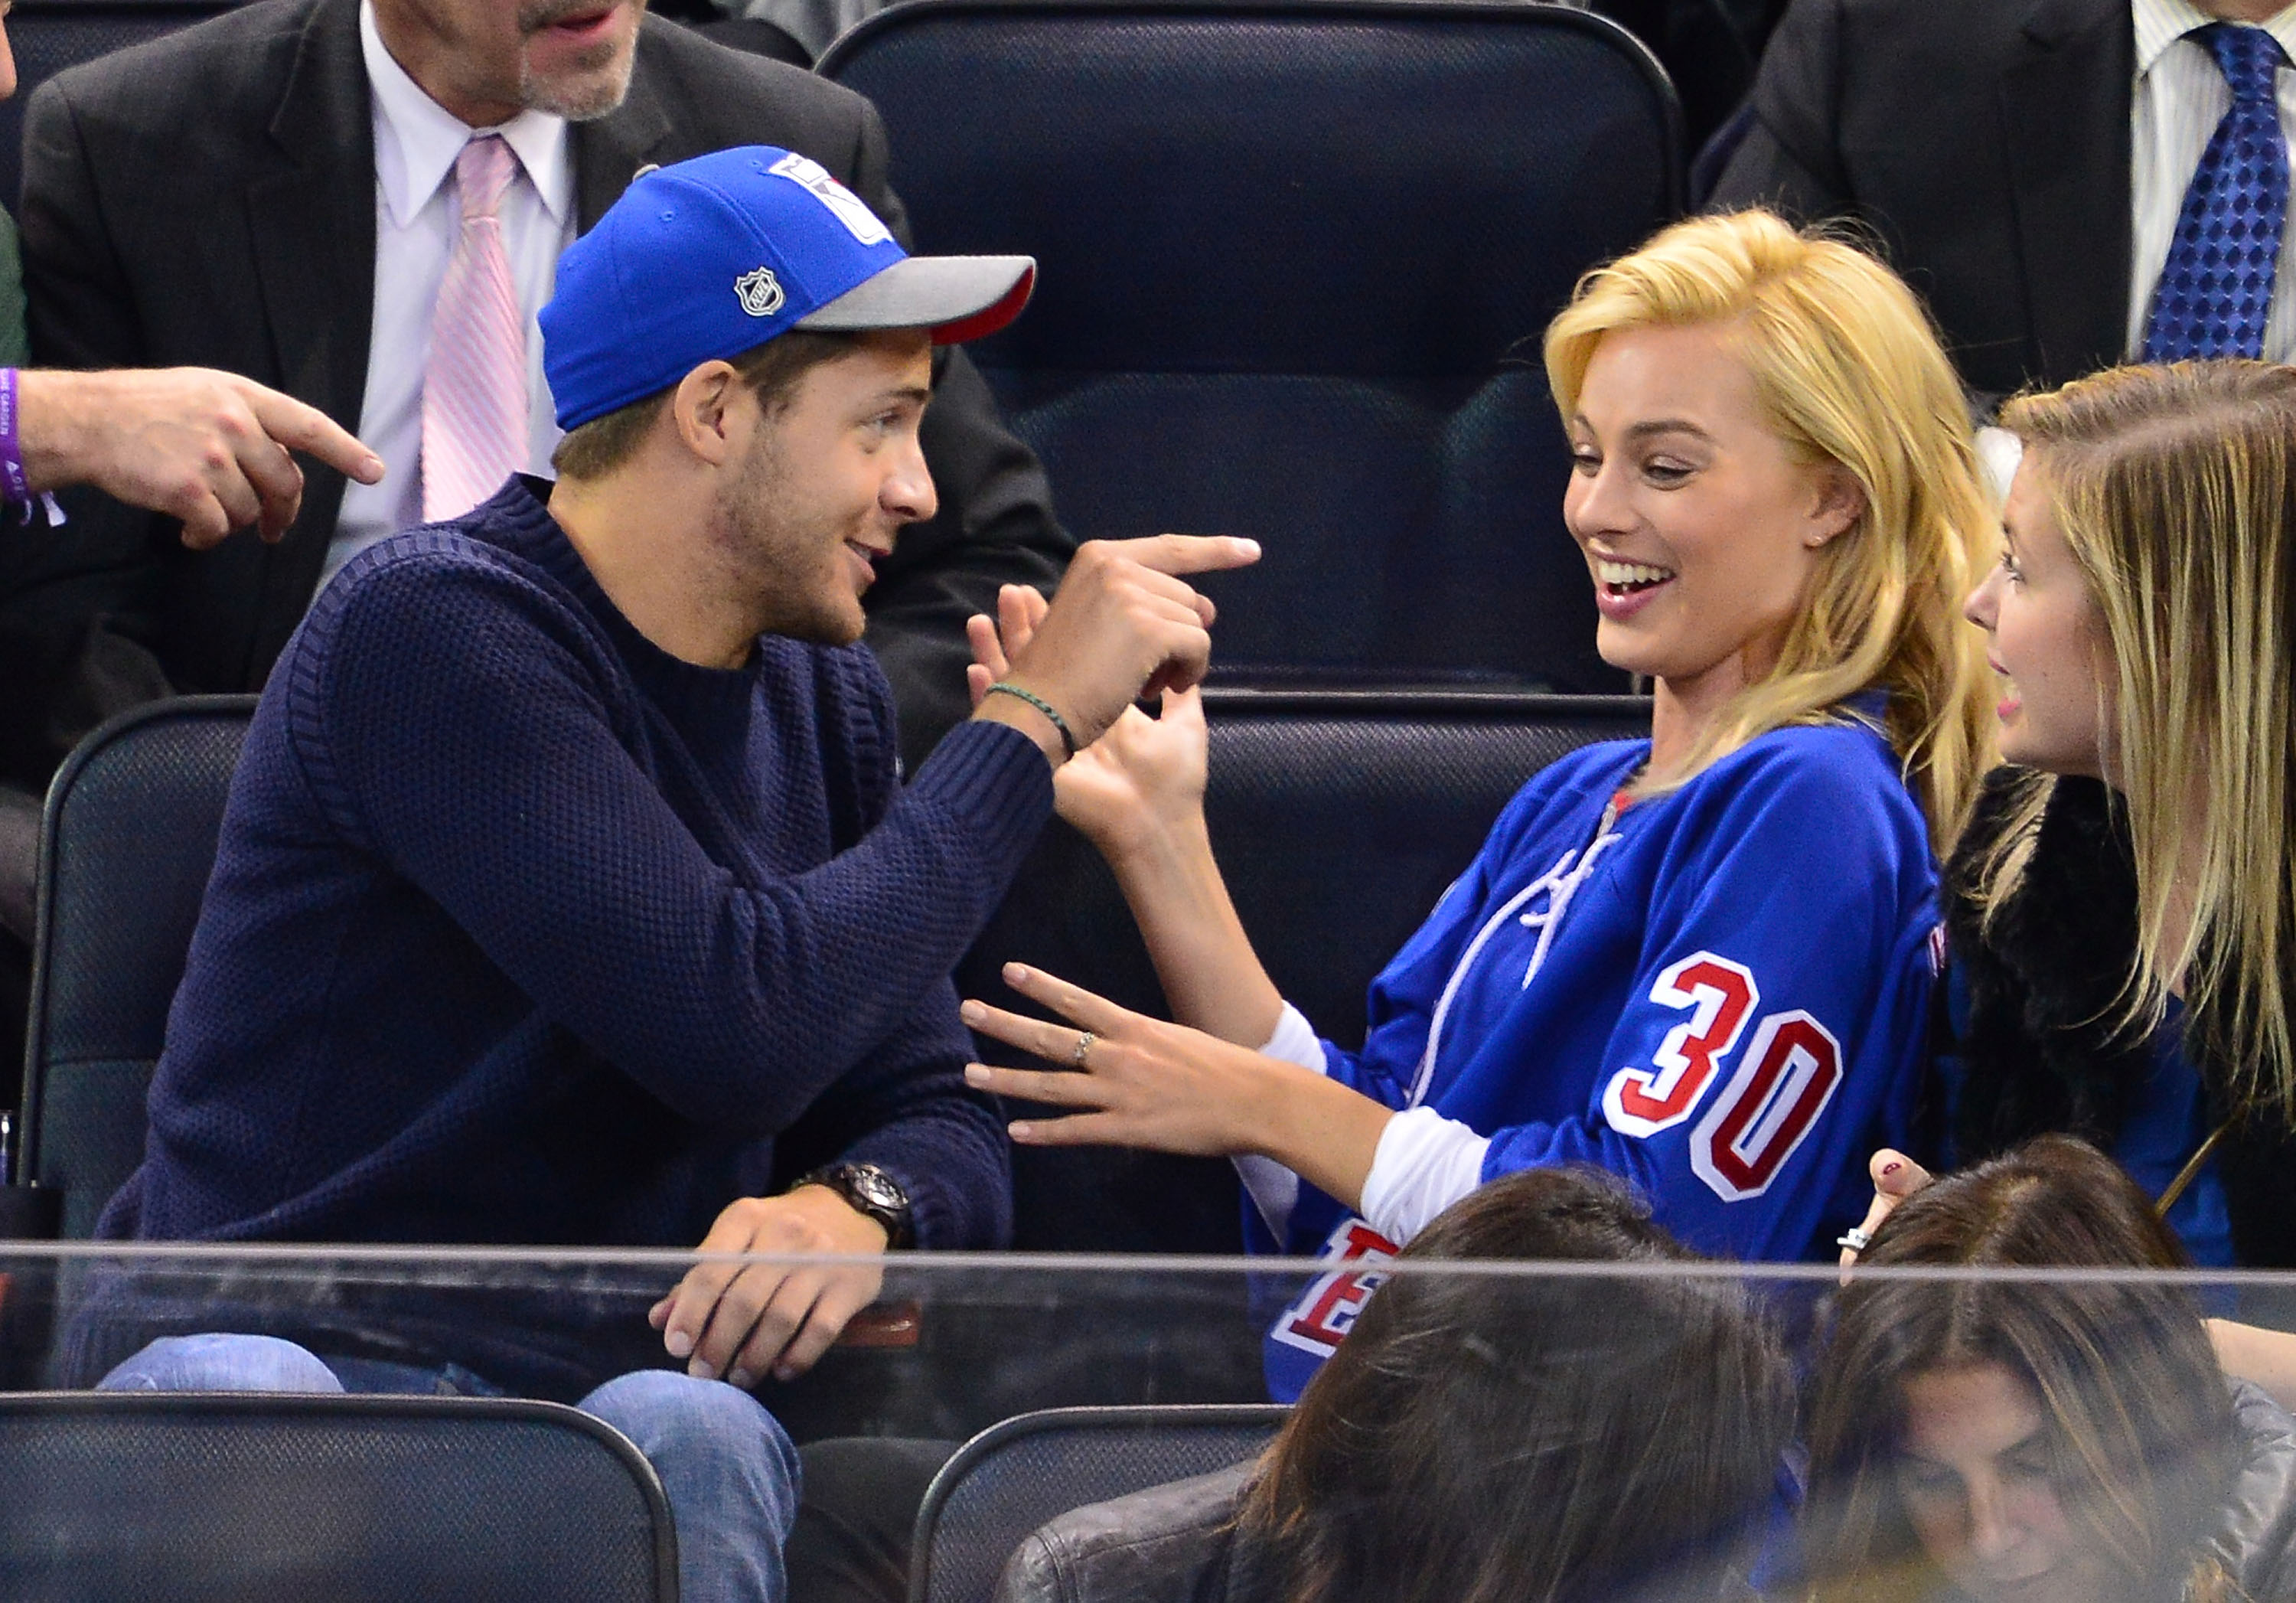 Tom Ackerley and Margot Robbie at the Philadelphia Flyers vs. New York Rangers game in New York City on November 19, 2014 | Source: Getty Images